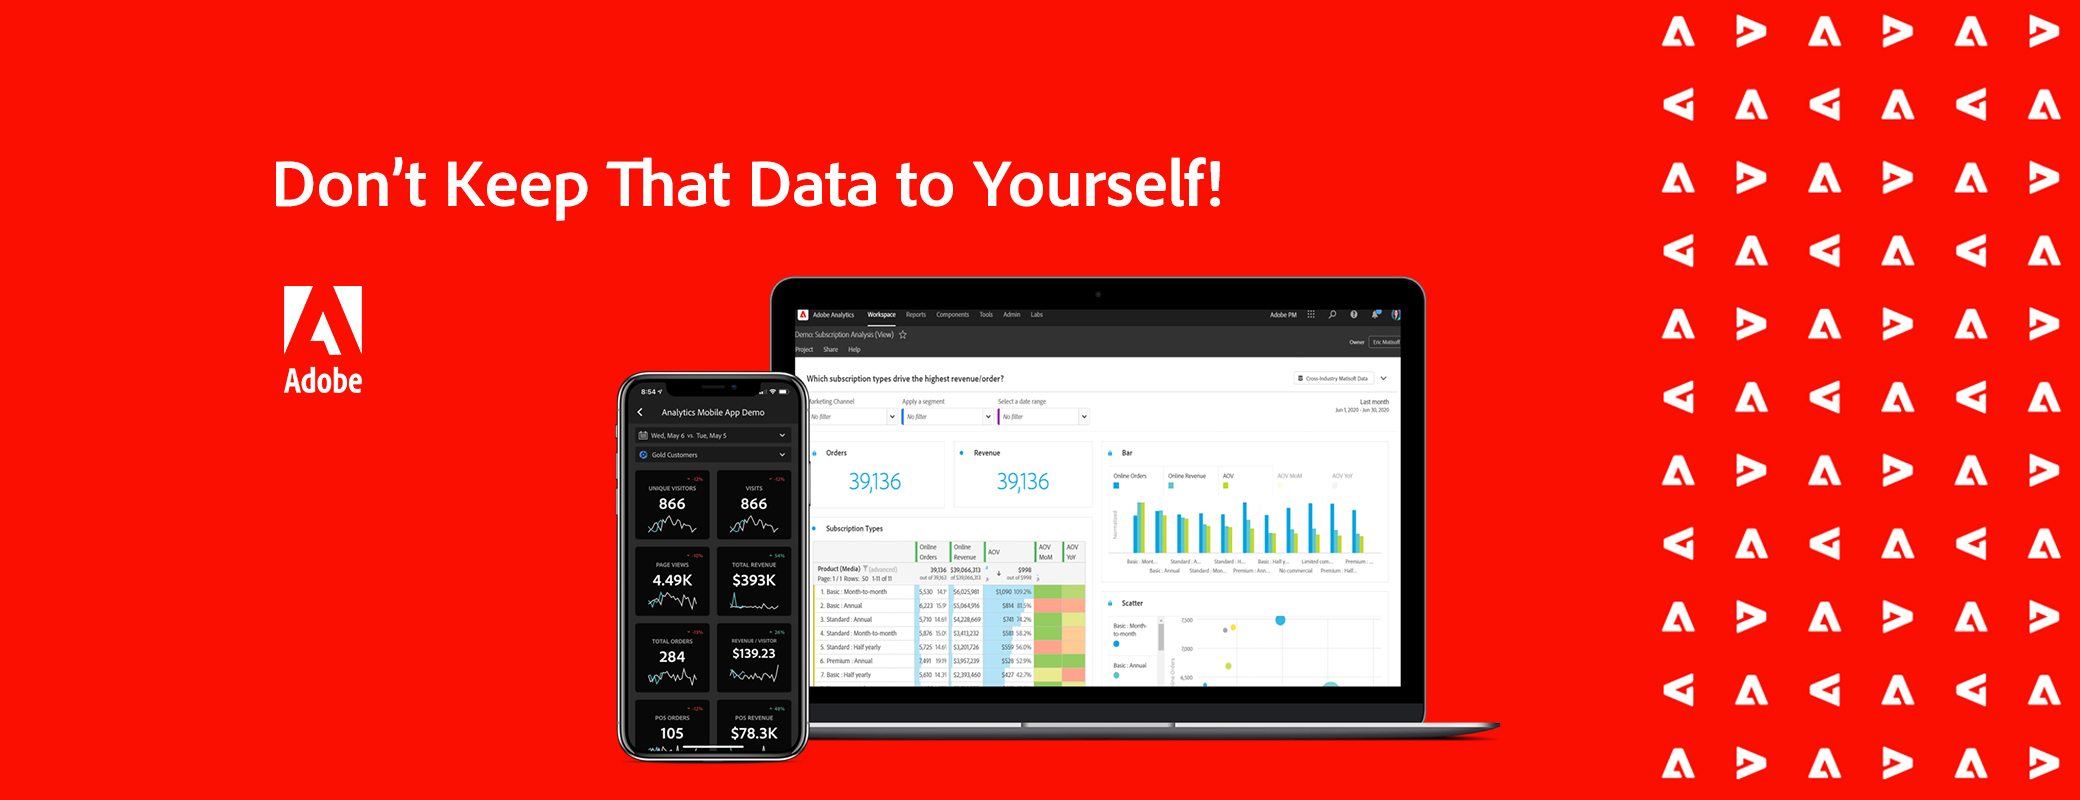 Don’t Keep That Data To Yourself!